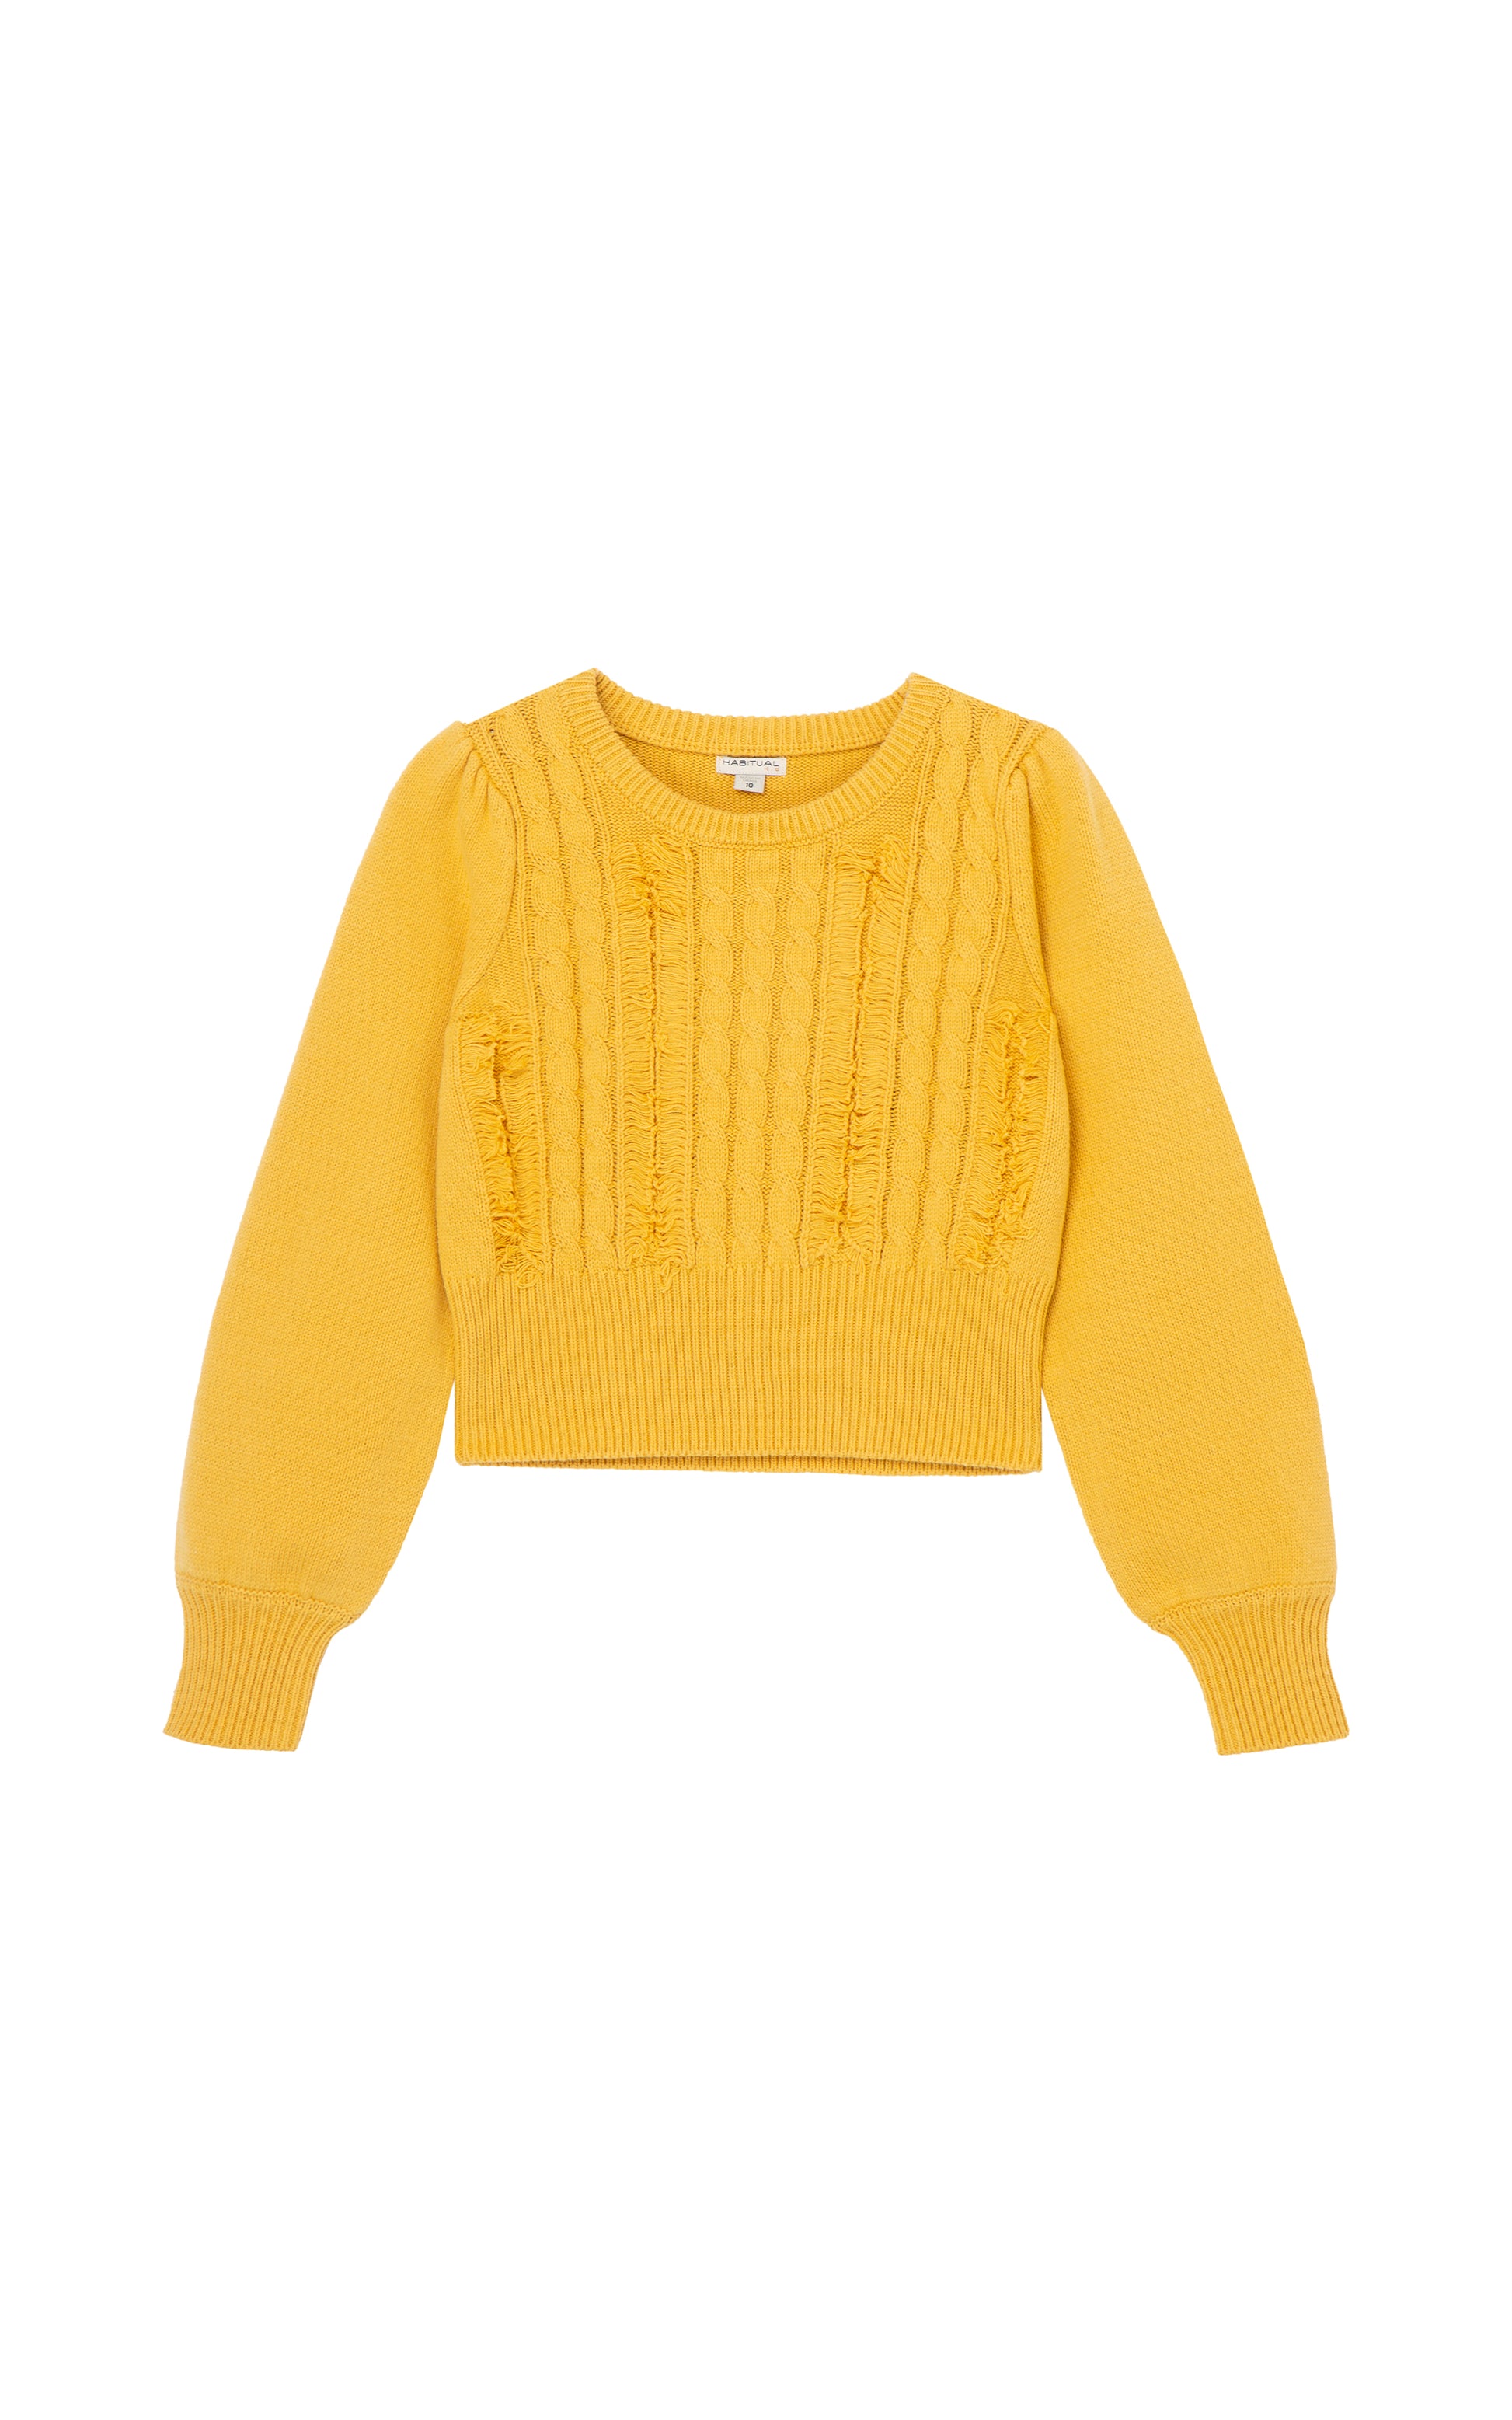 Front view of a yellow cable-knit sweater with fringe detailing